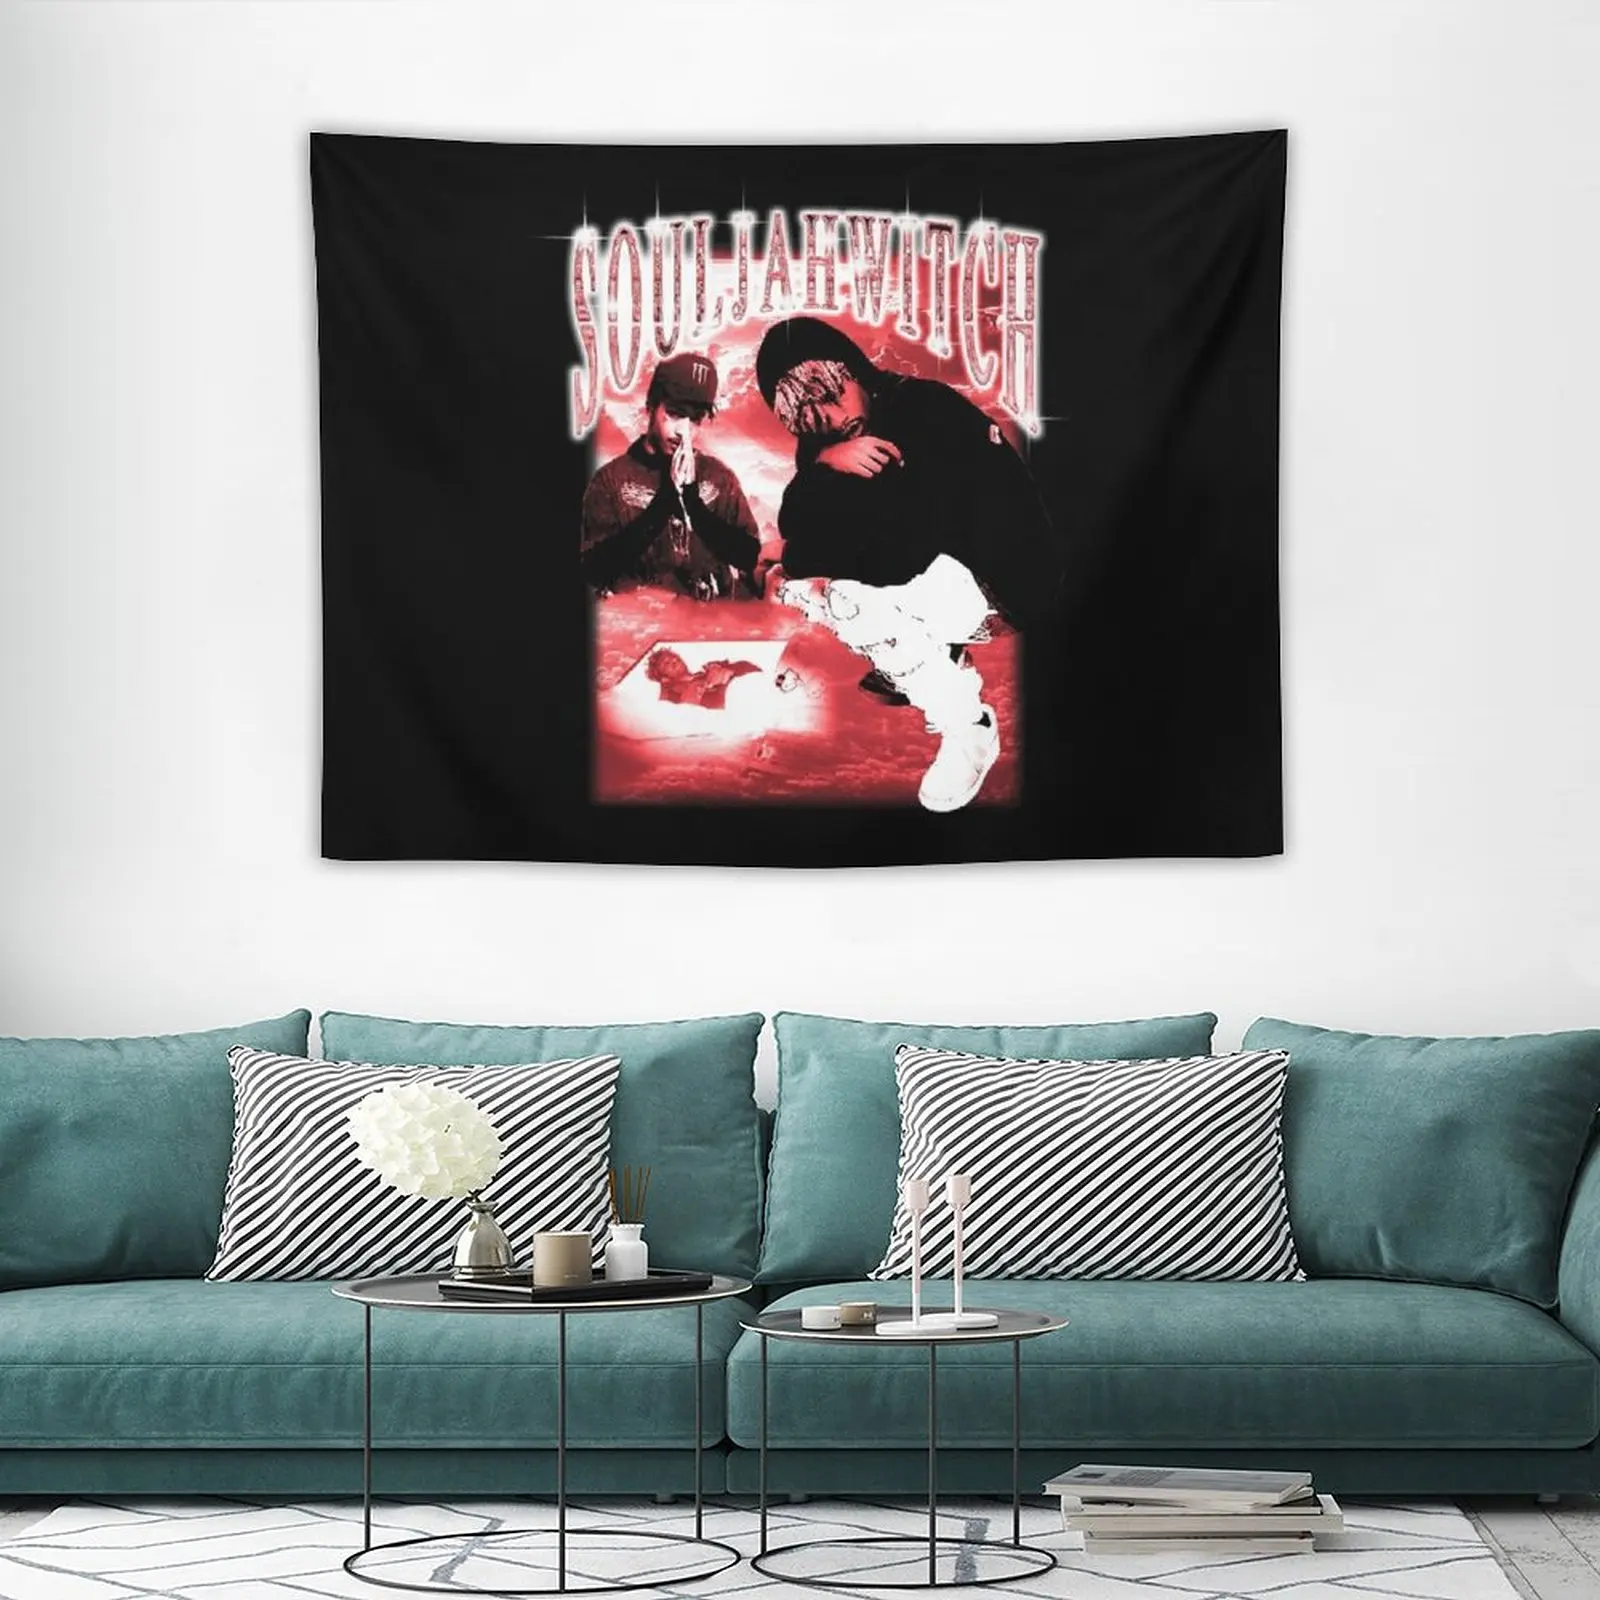 Lil Tracy Souljawitch Tapestry Room Decor Decoration Room